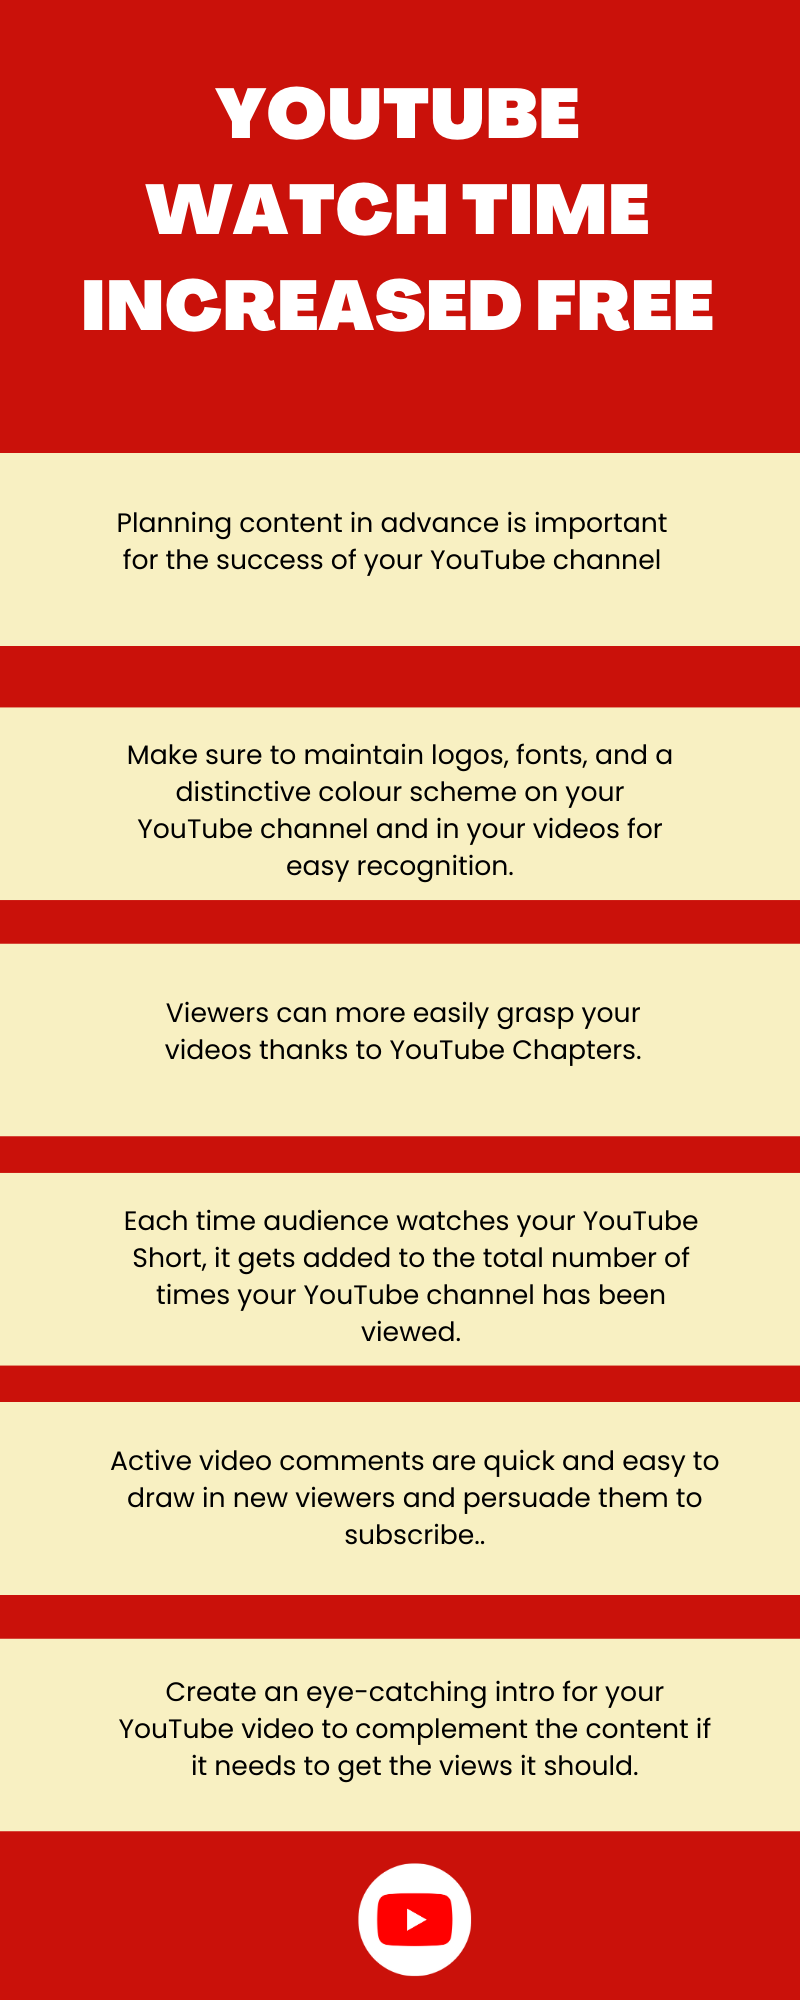 Get More YouTube Watch Time Free